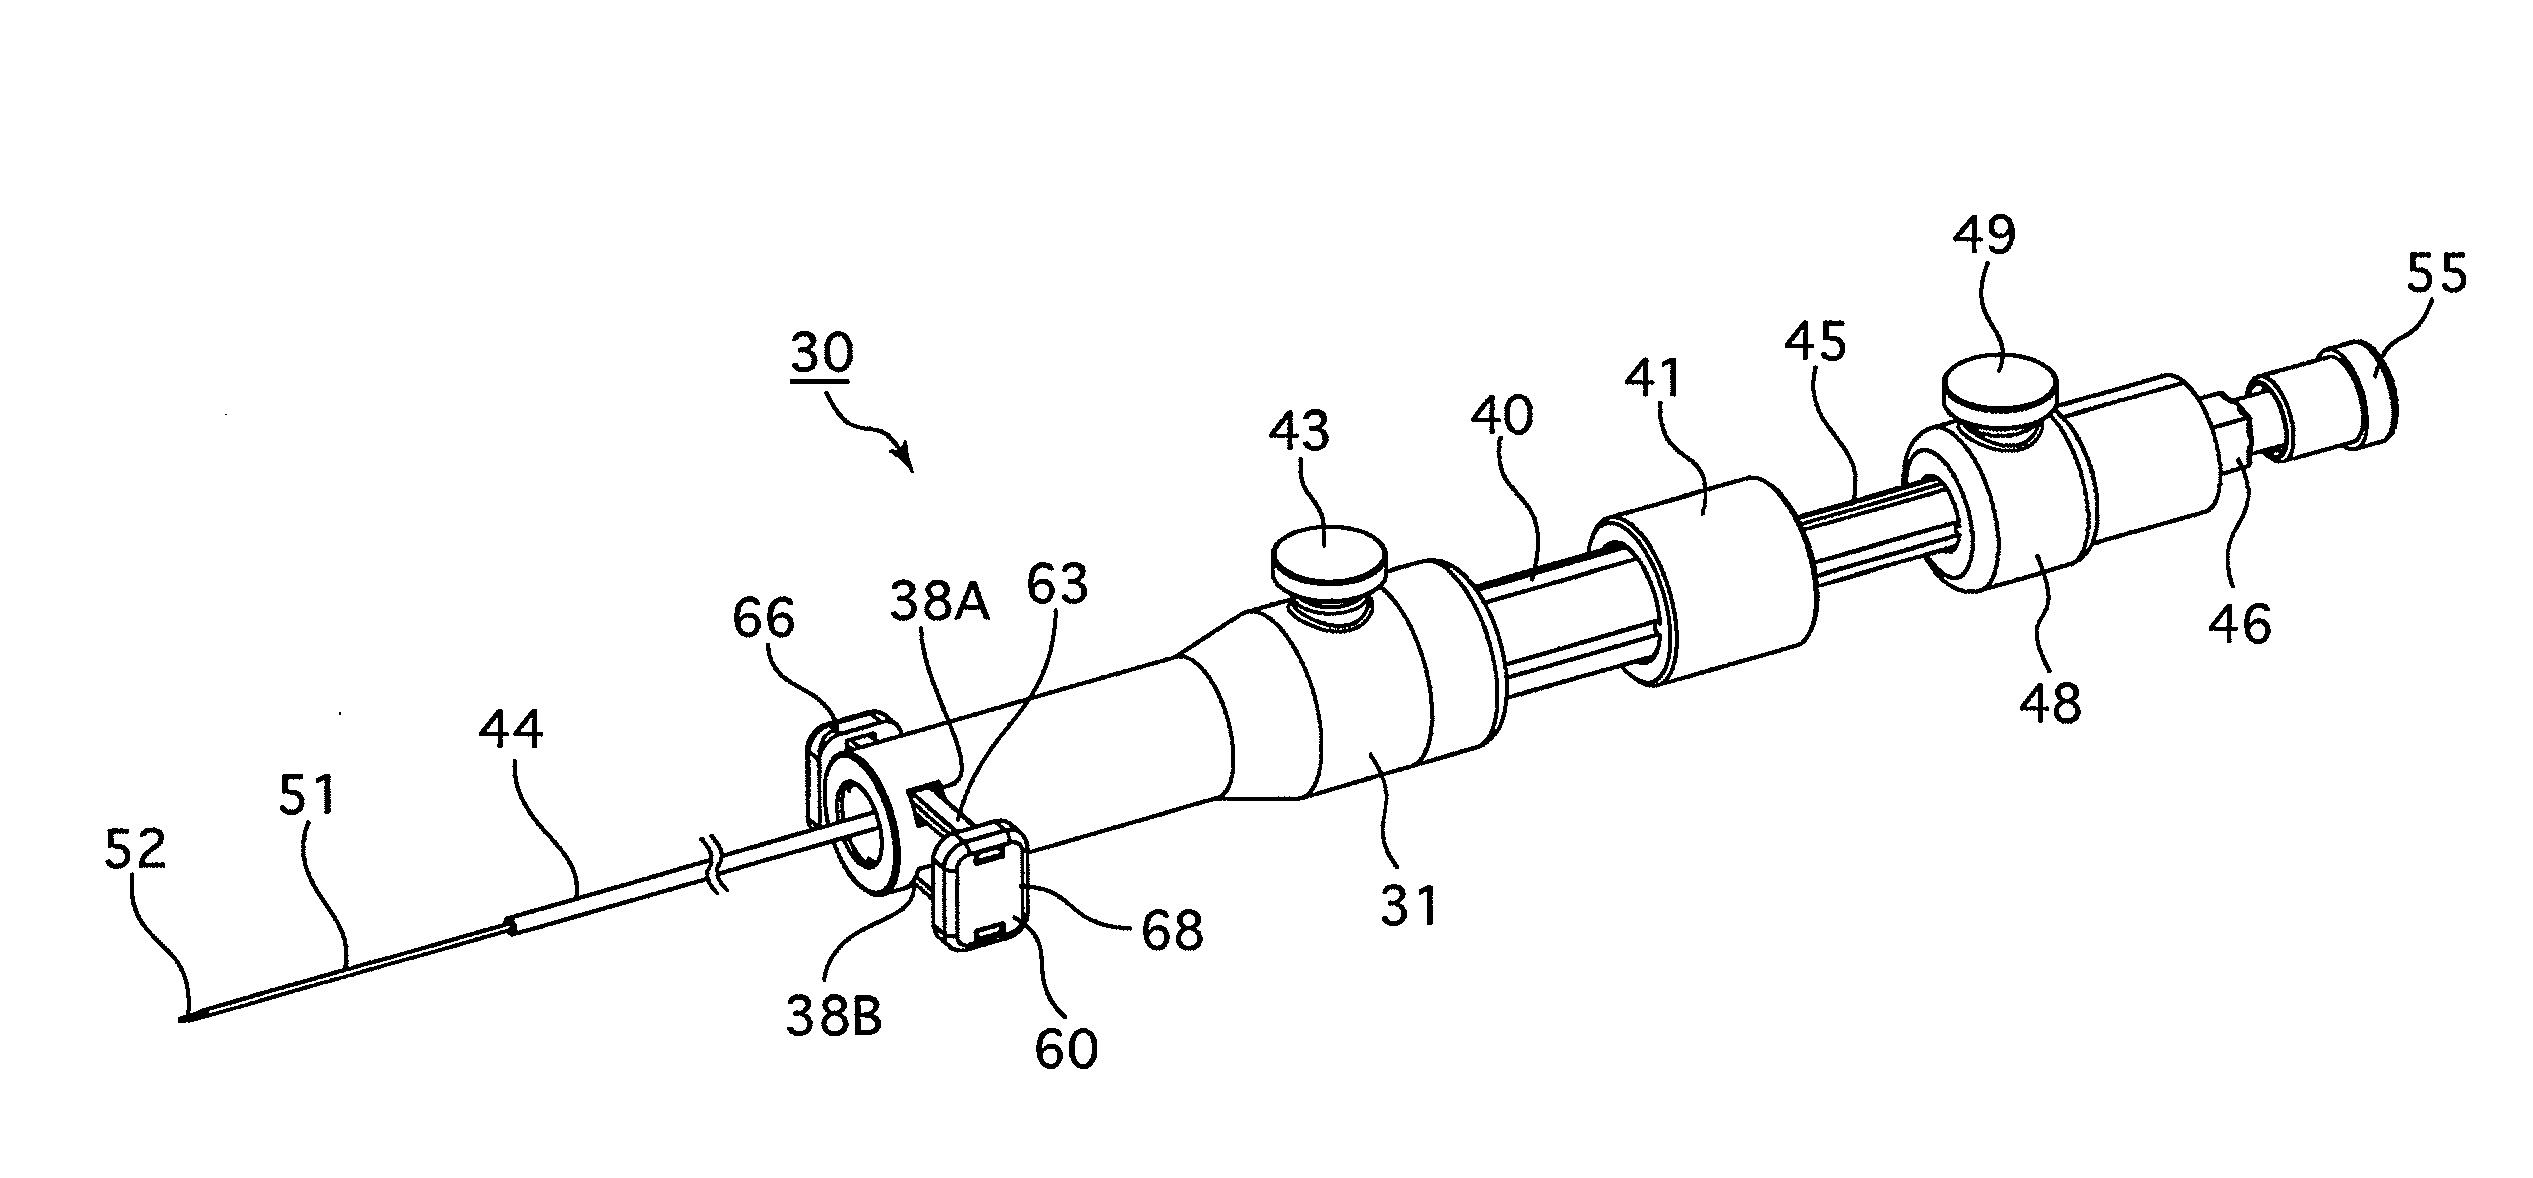 Puncture needle device for ultrasonic endoscope